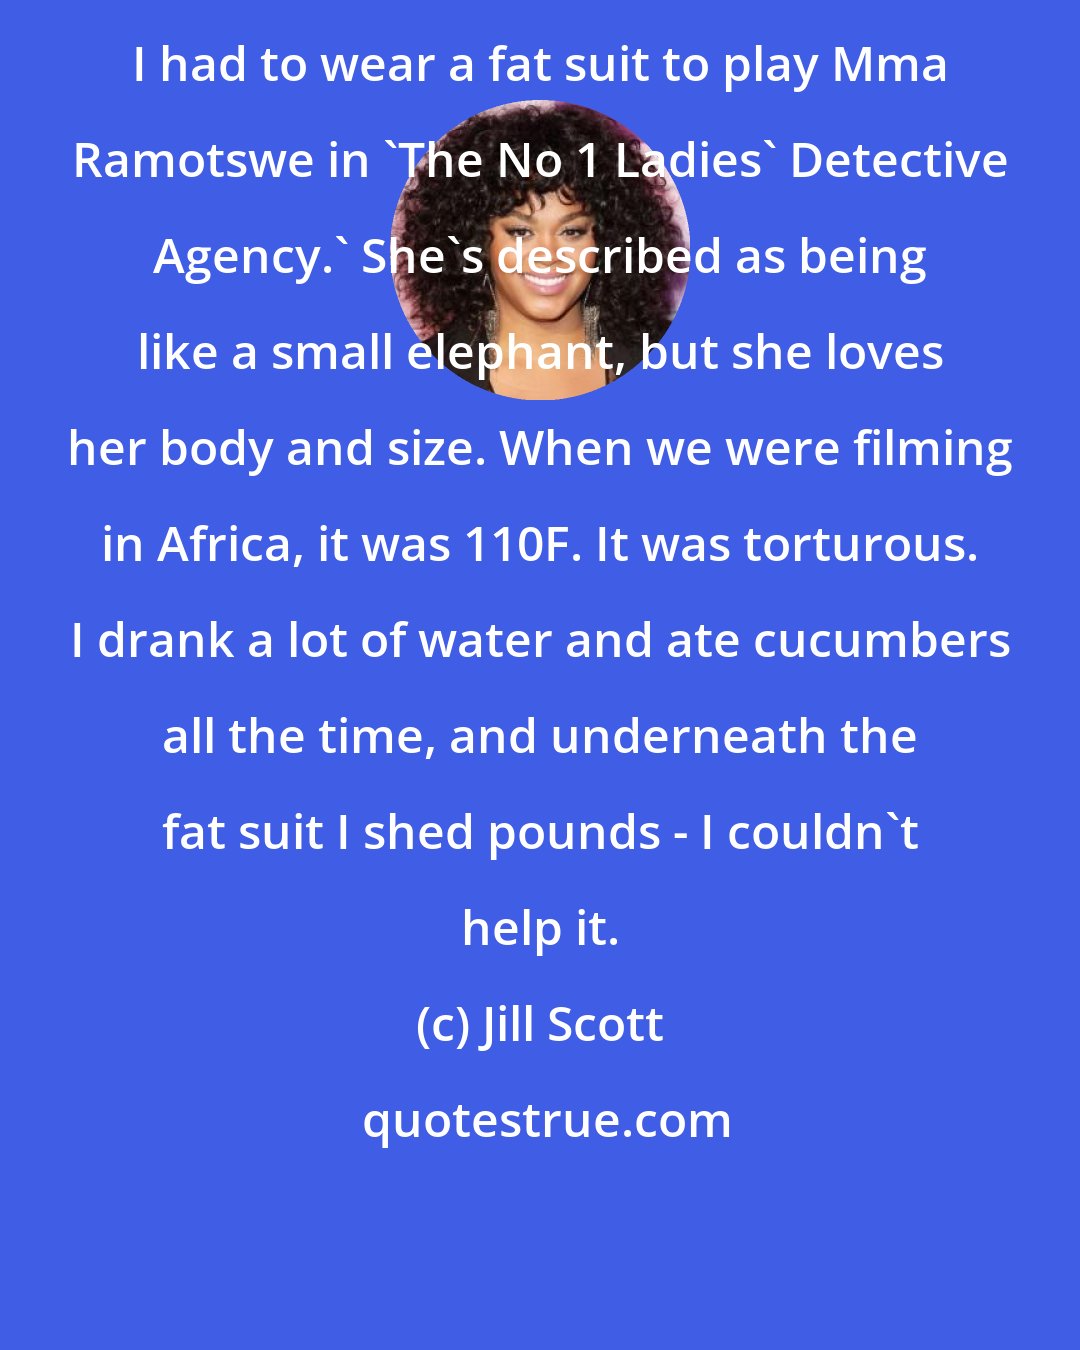 Jill Scott: I had to wear a fat suit to play Mma Ramotswe in 'The No 1 Ladies' Detective Agency.' She's described as being like a small elephant, but she loves her body and size. When we were filming in Africa, it was 110F. It was torturous. I drank a lot of water and ate cucumbers all the time, and underneath the fat suit I shed pounds - I couldn't help it.